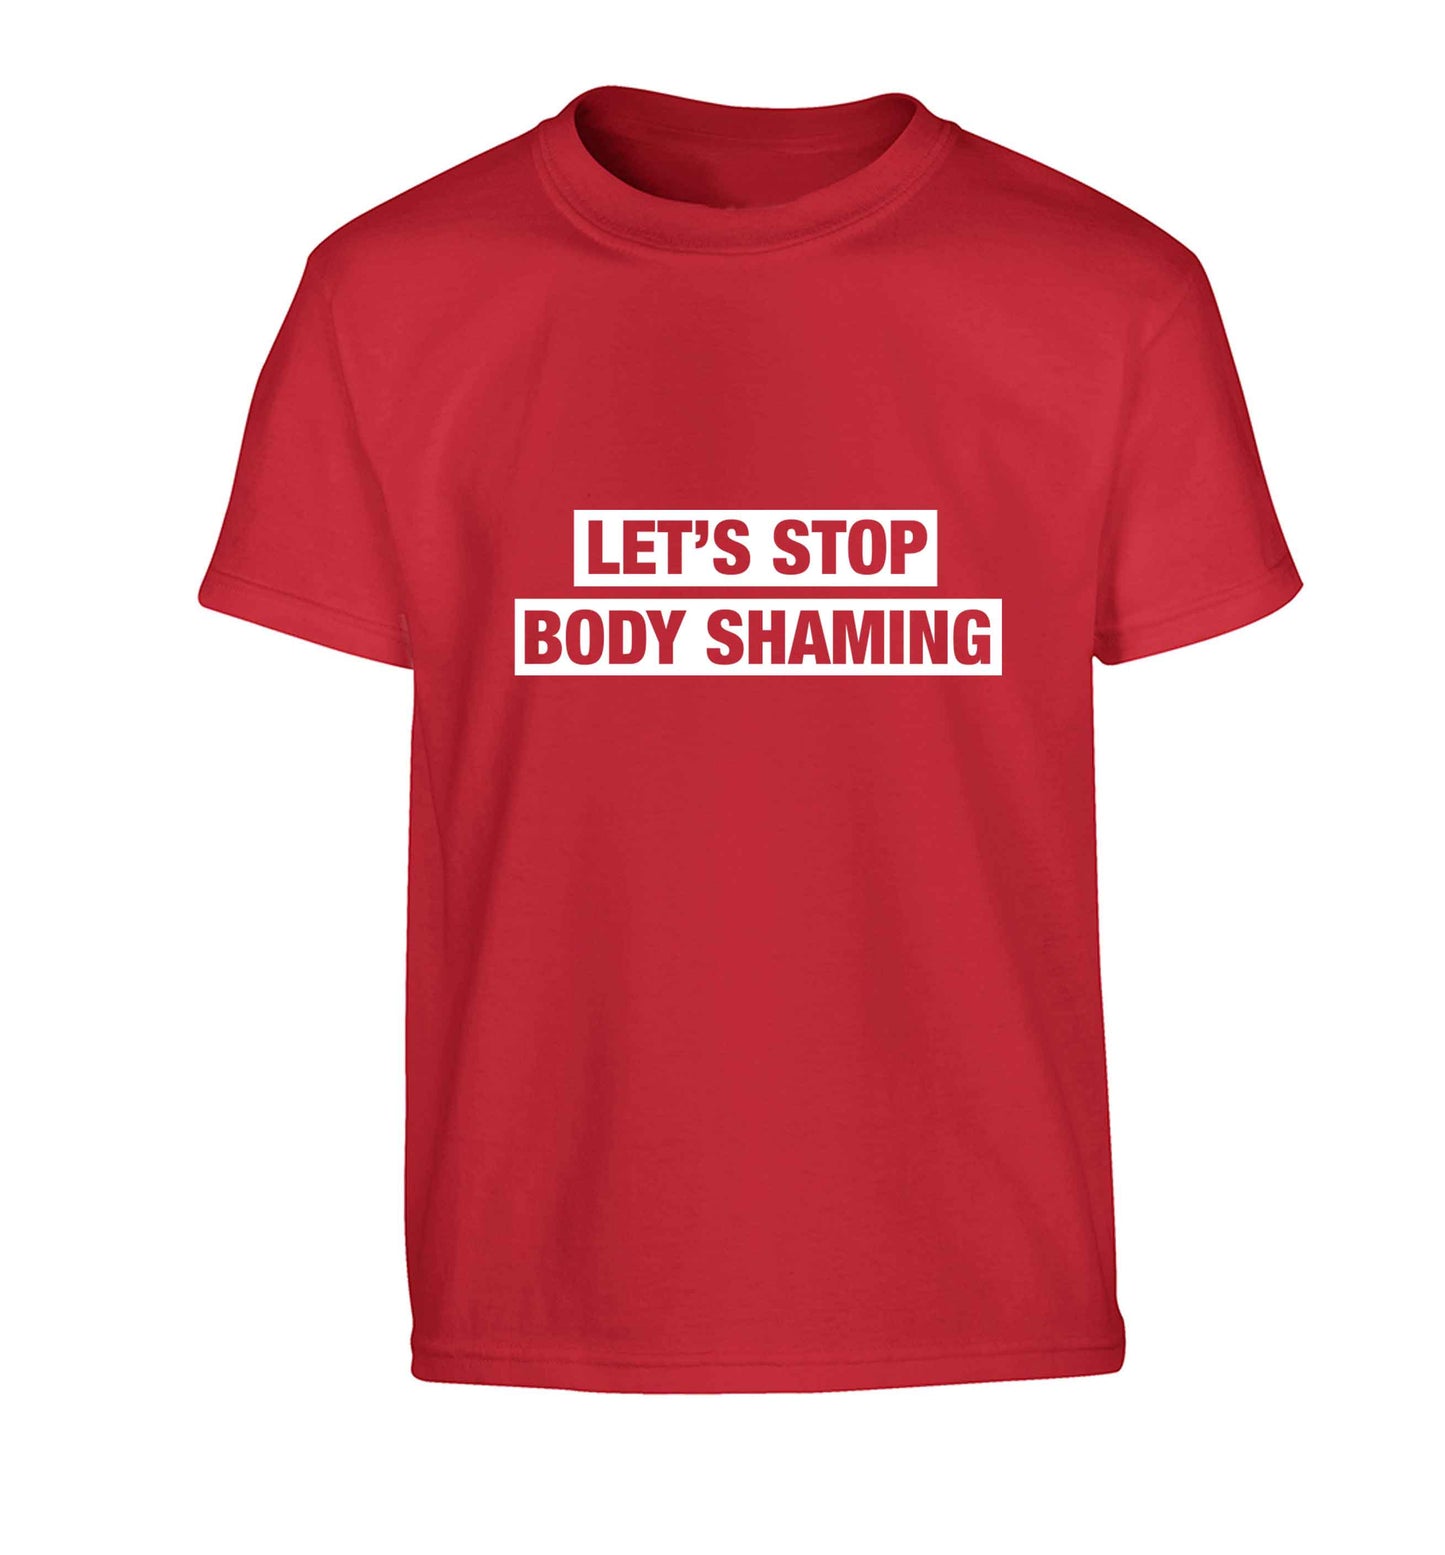 Let's stop body shaming Children's red Tshirt 12-13 Years